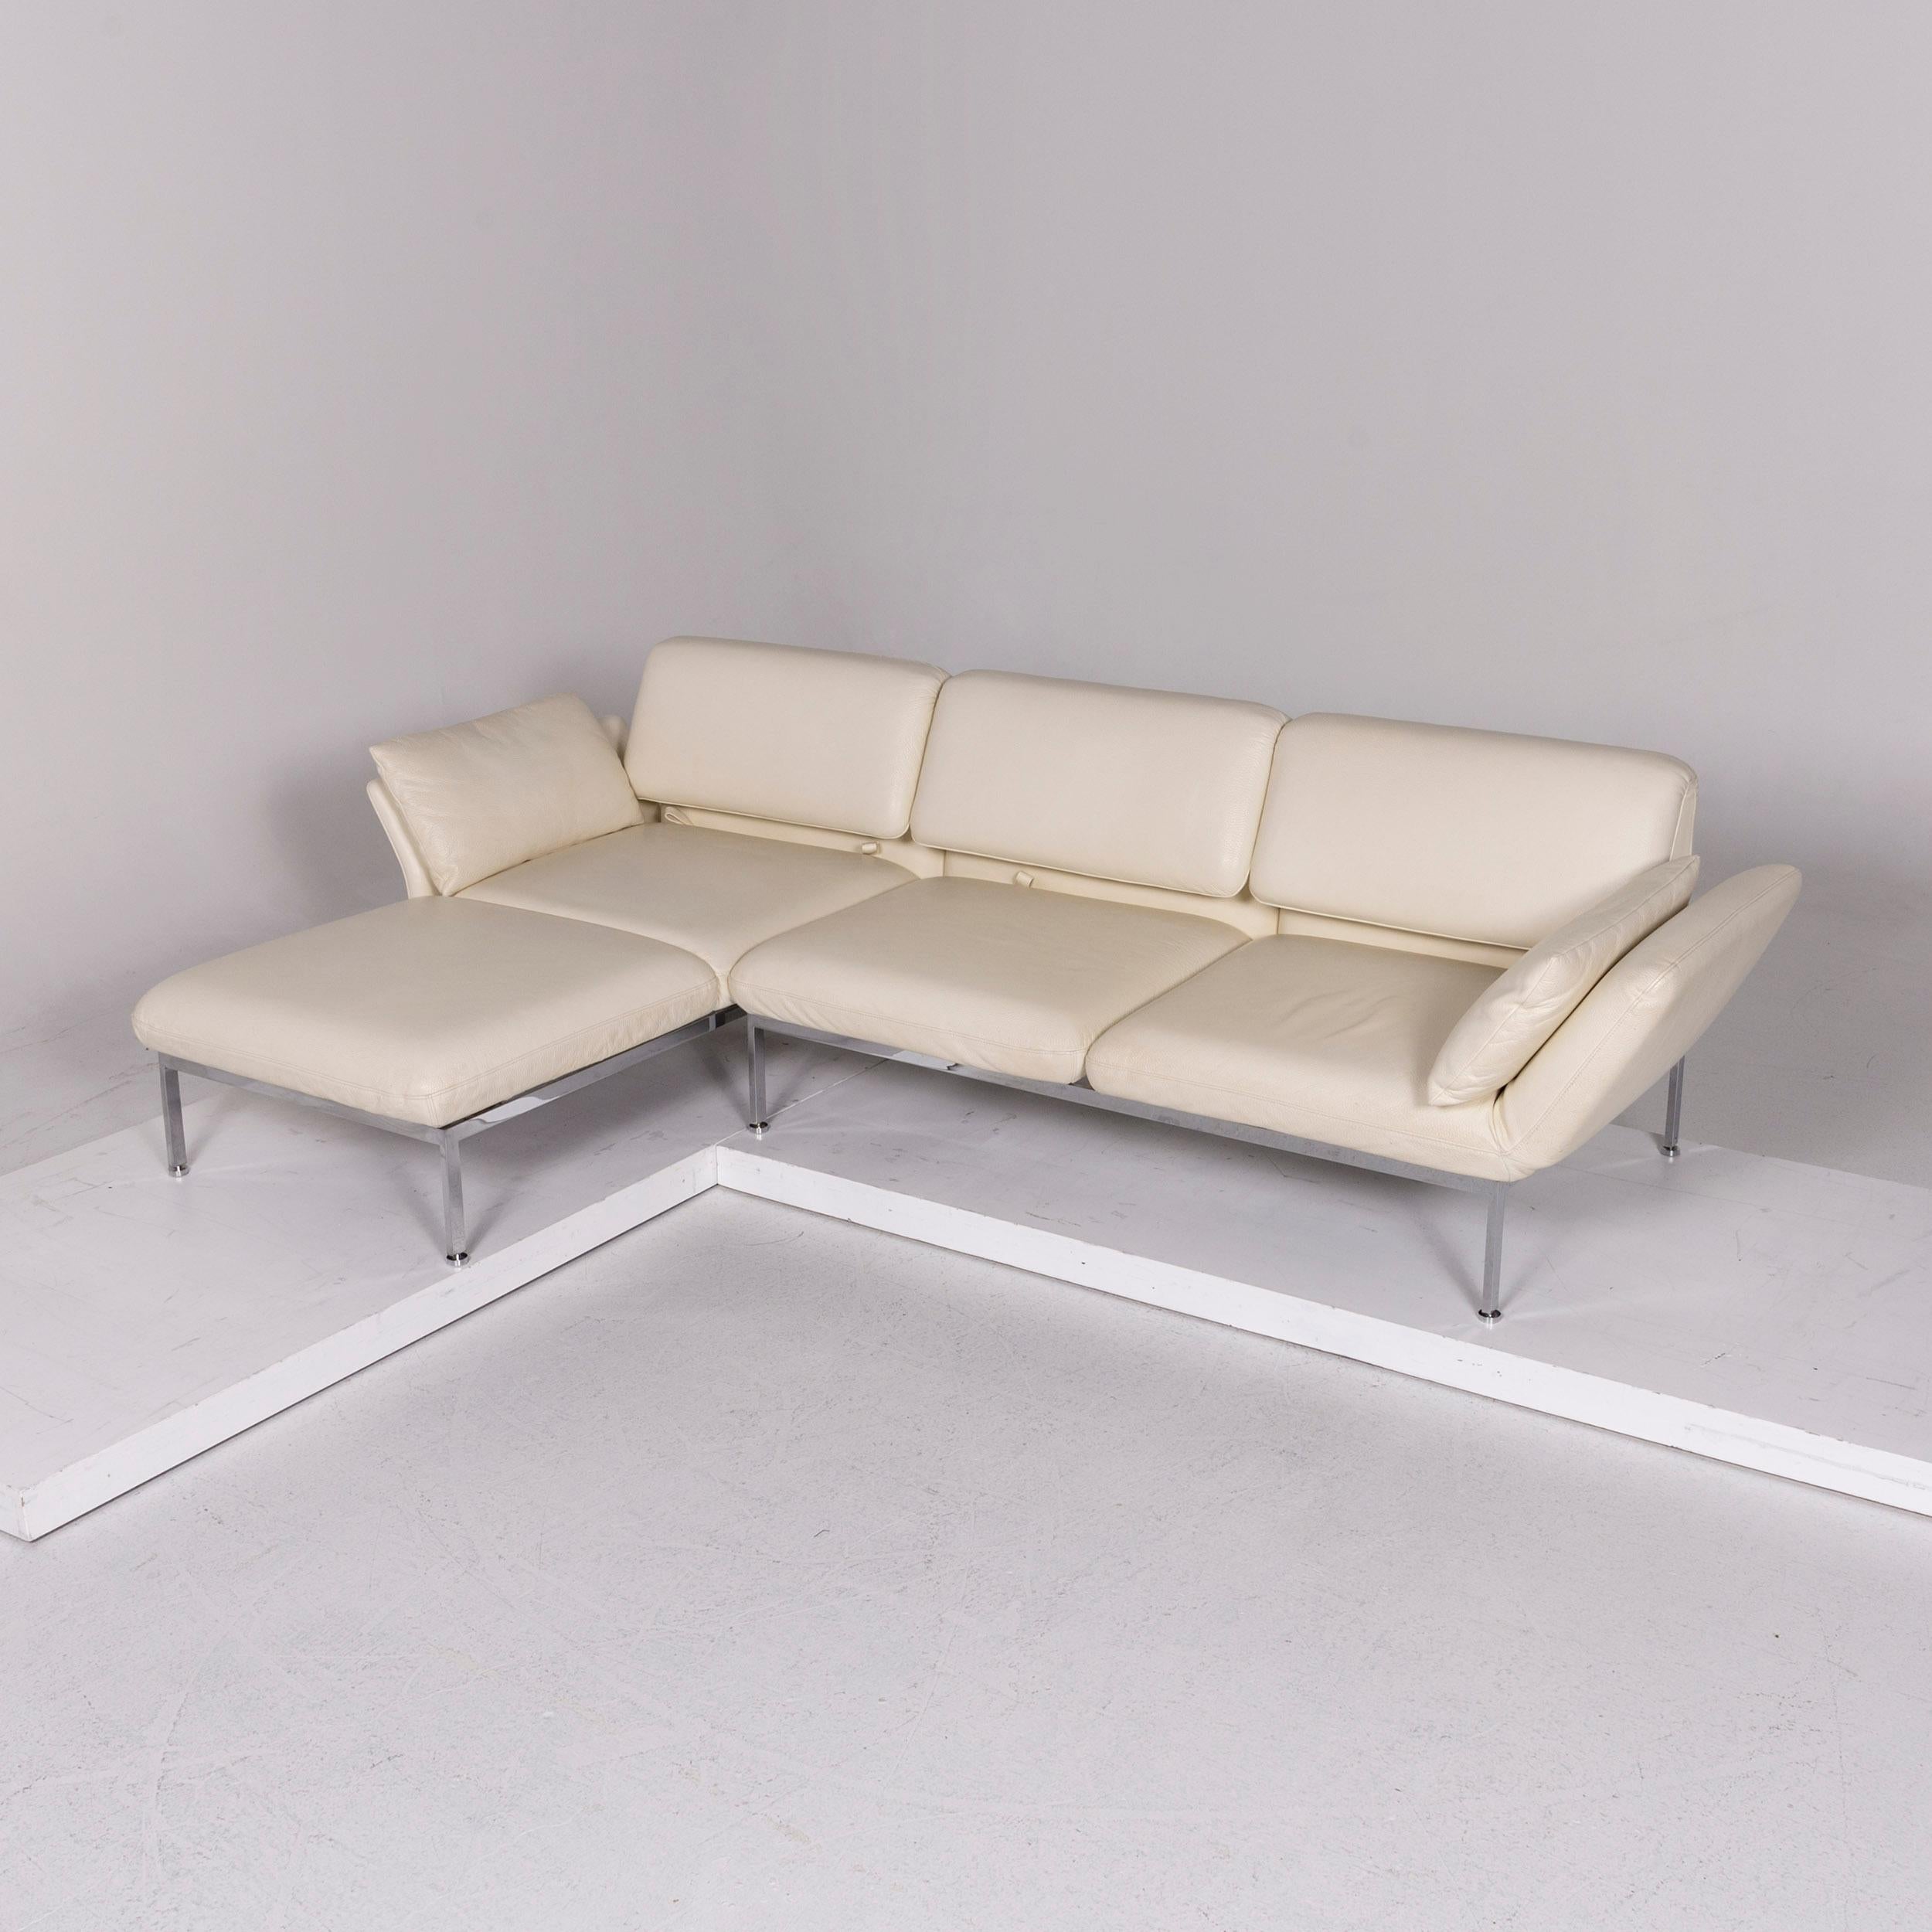 Brühl & Sippold Roro Leather Corner Sofa Cream Sofa Function Relax Function In Good Condition For Sale In Cologne, DE